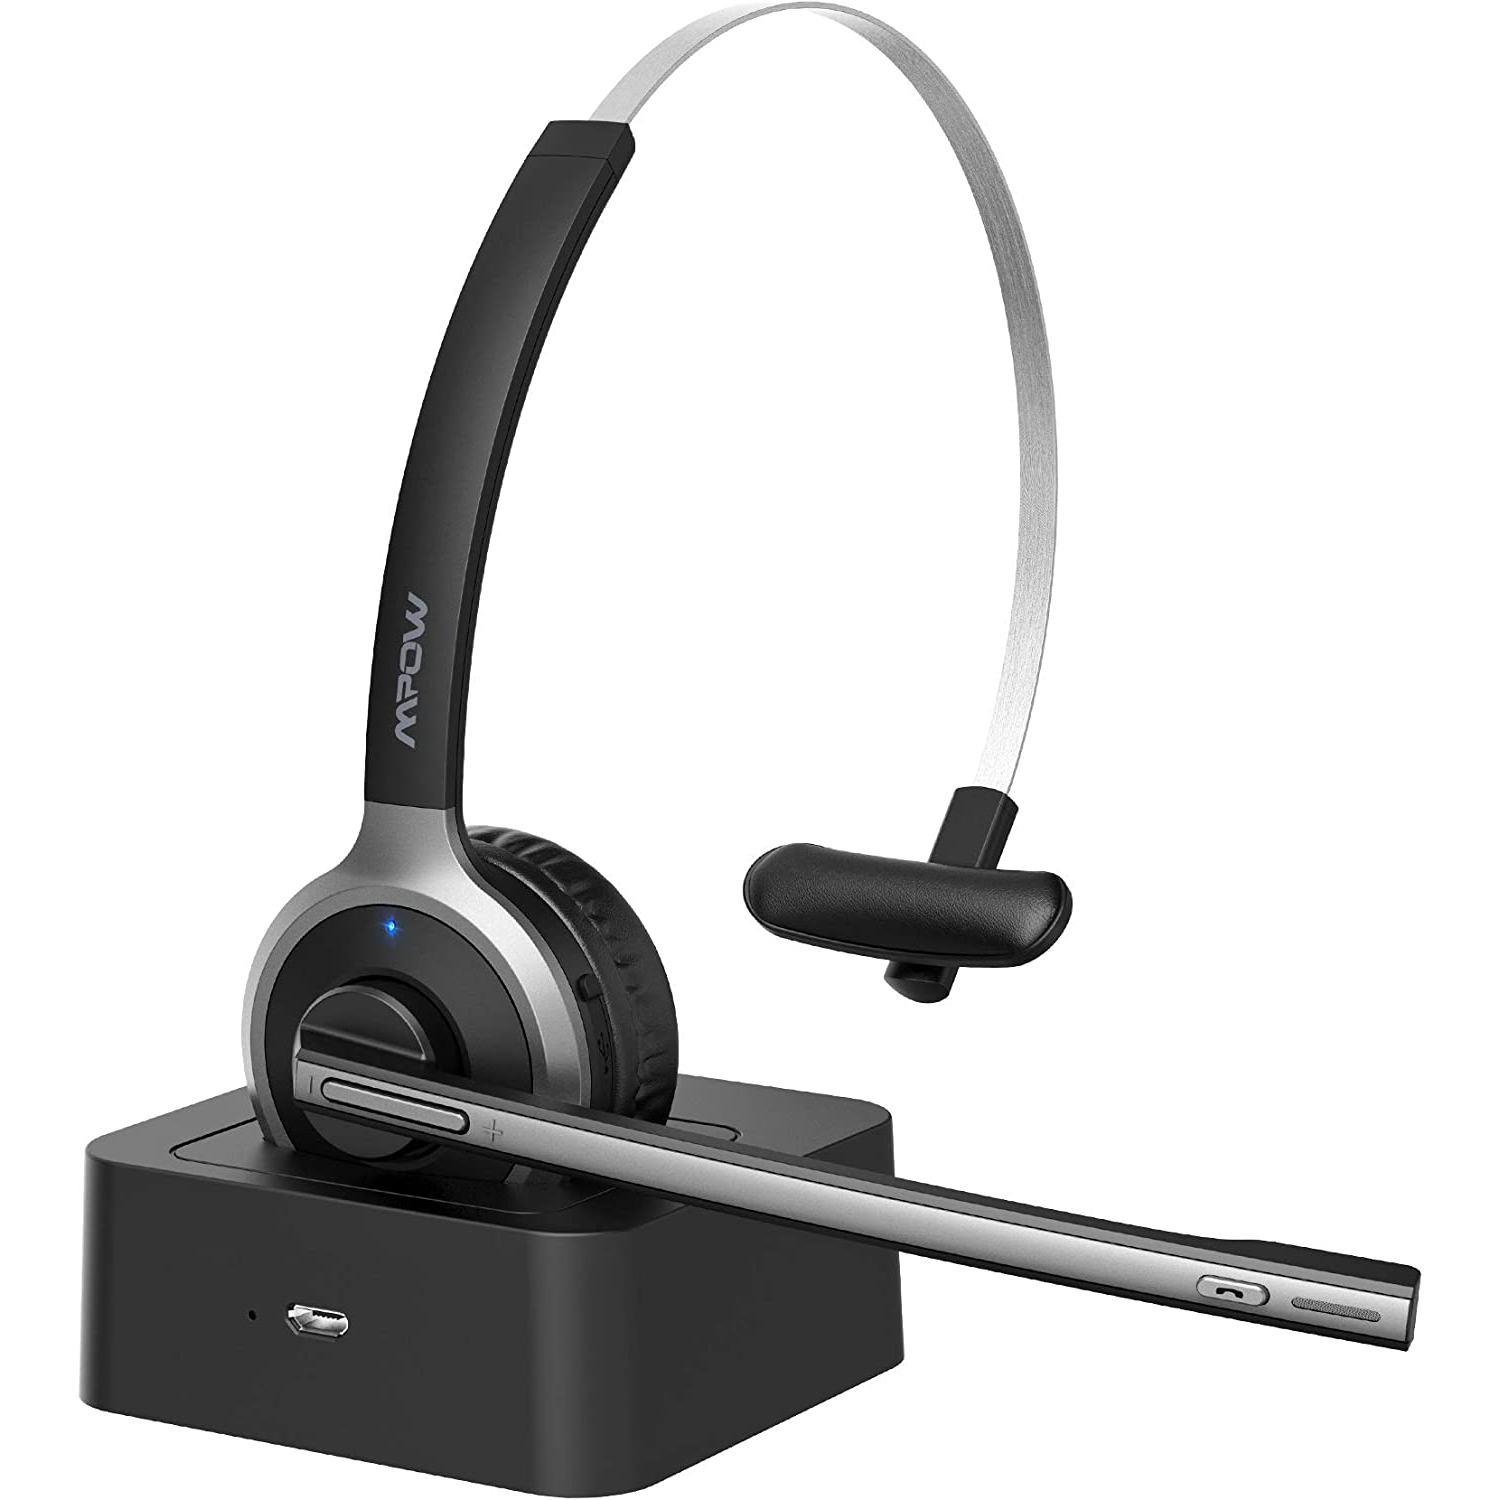 Mpow Bluetooth Headset with Microphone, Wireless Headphones for Cell Phone - Open Box